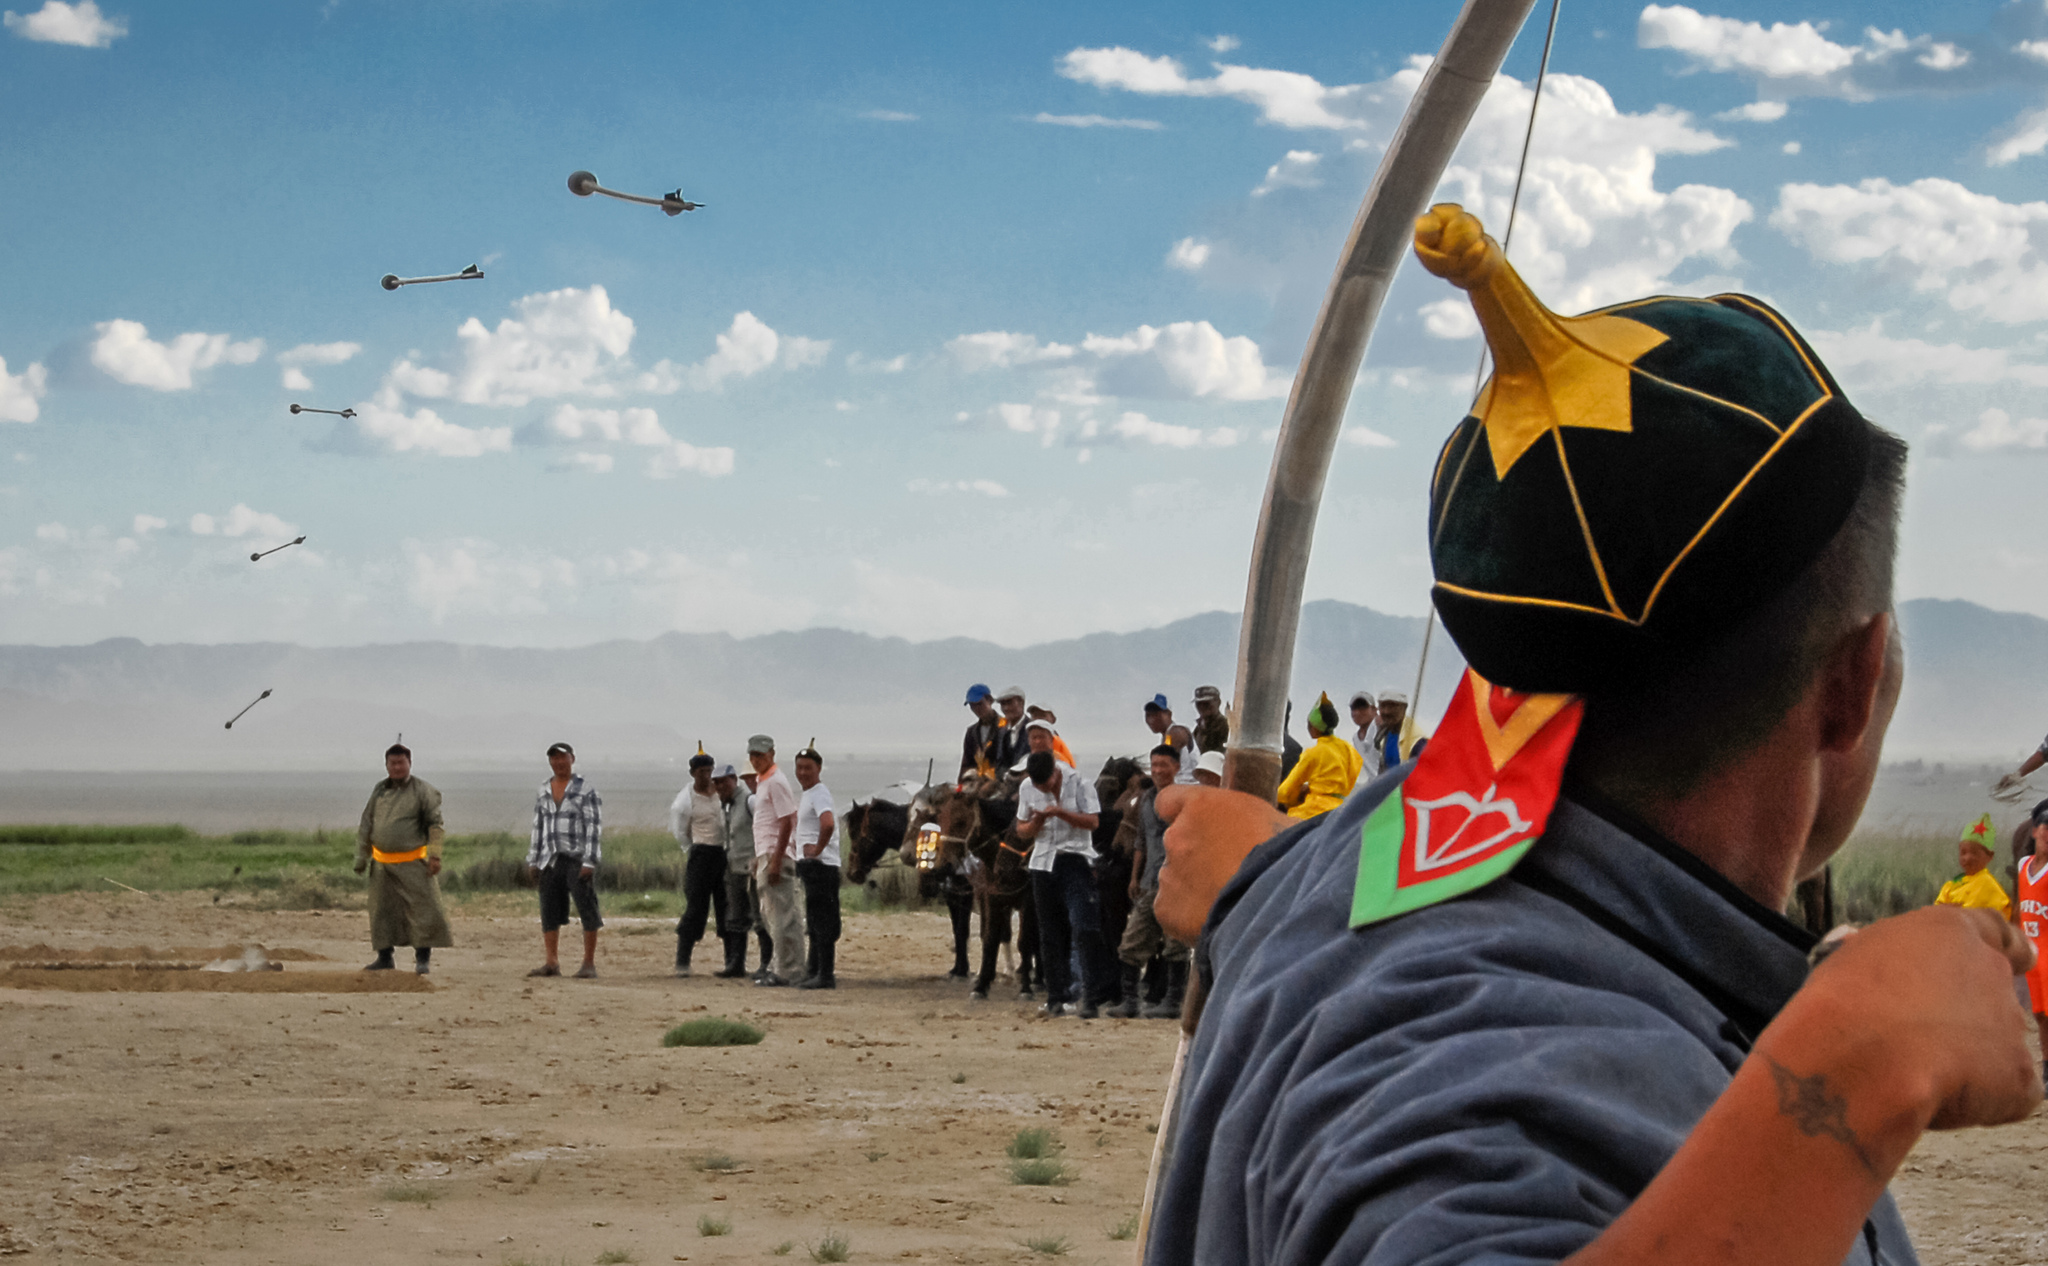 Mongolians use a very effective recurved composite bow. For this competition, the arrows have a big heavy arrowhead designed to hit a target on the ground. Flickr - Bernd Thaller